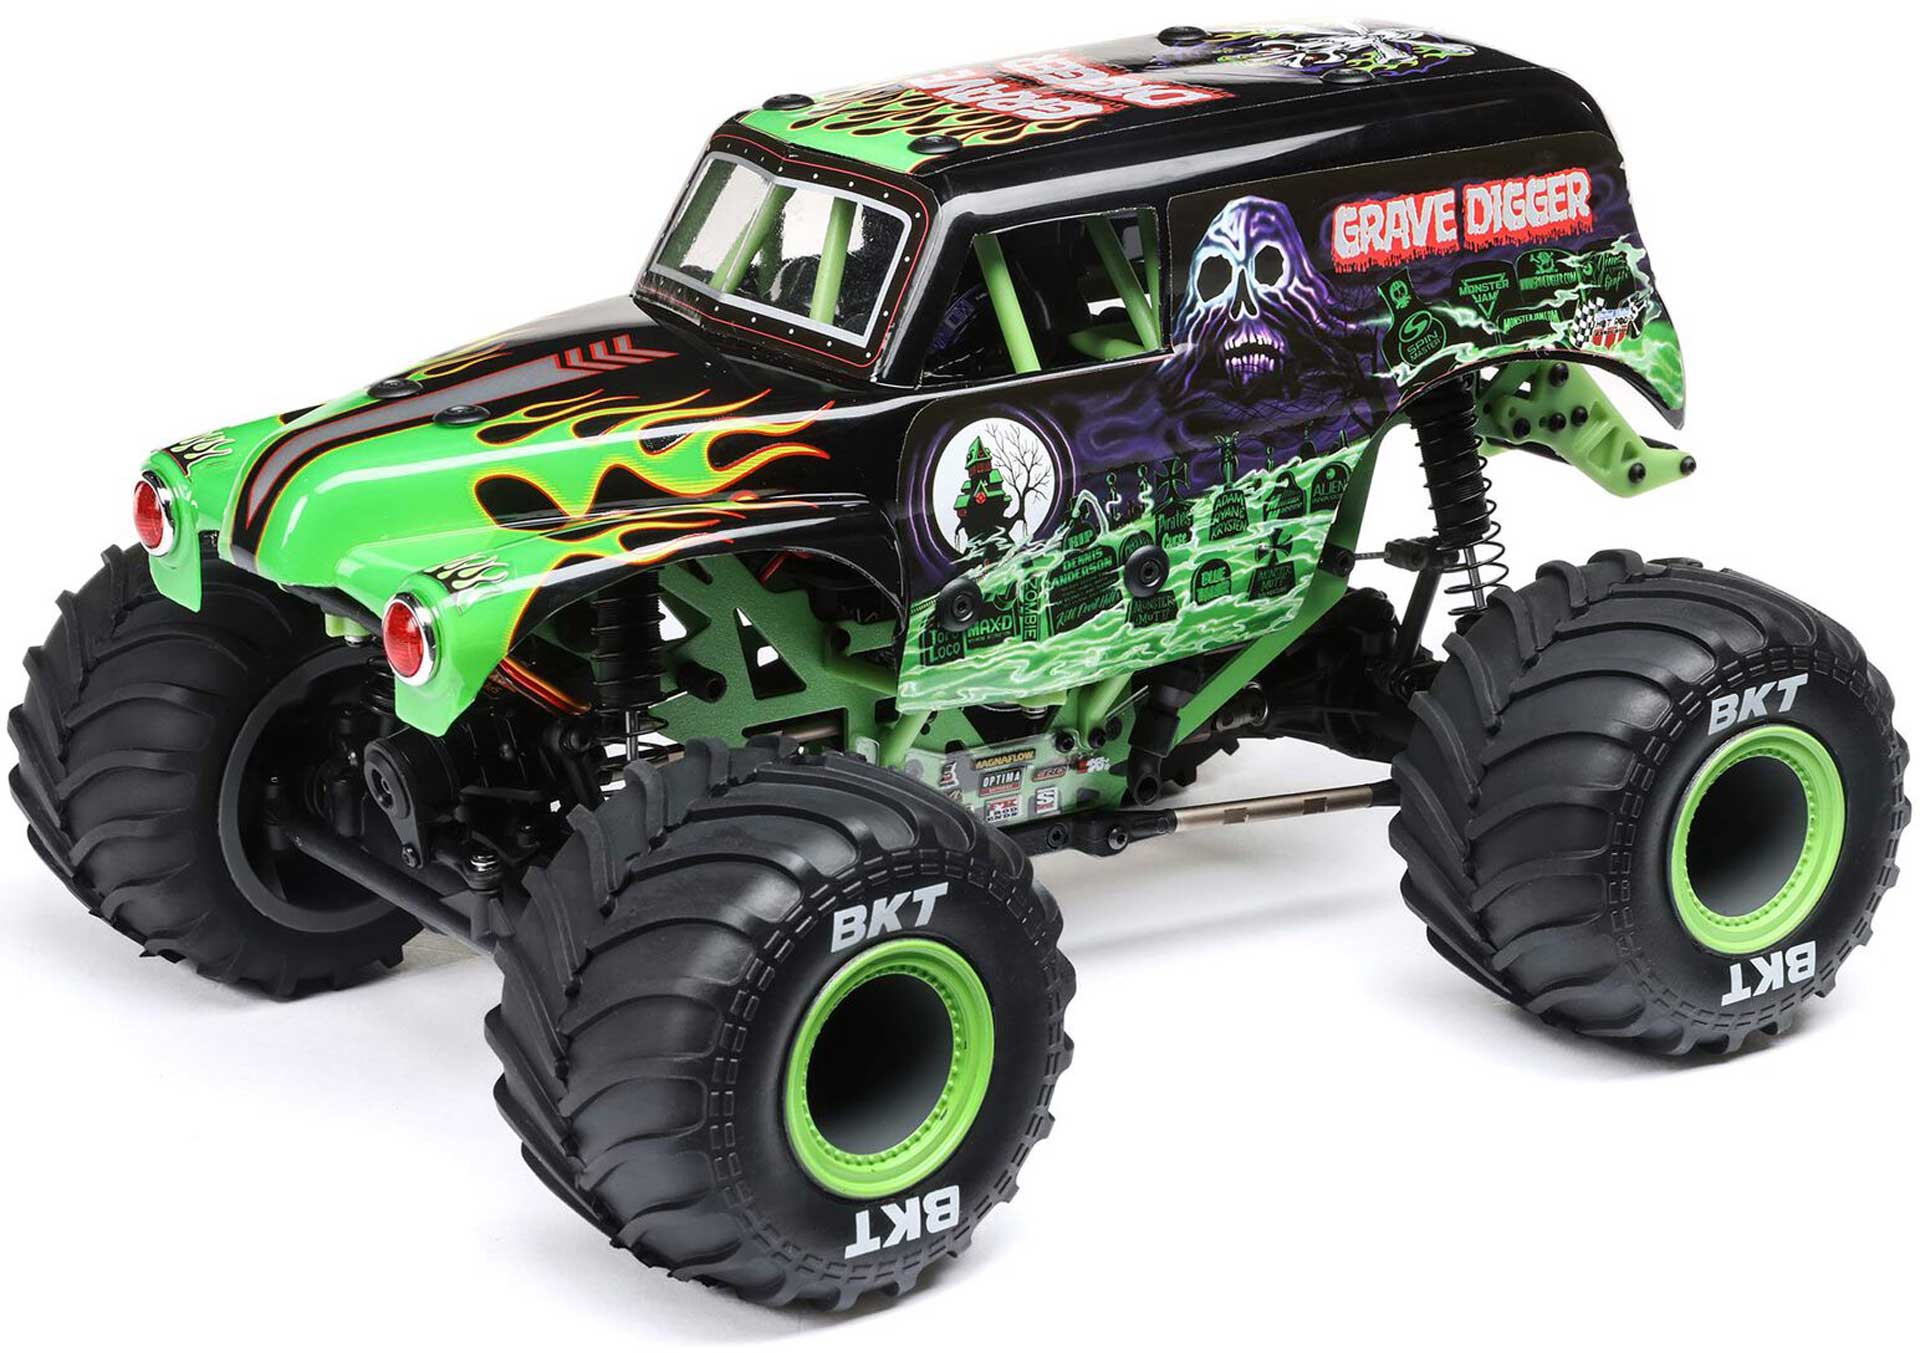 LOSI Mini LMT 1/18 4X4 Grave Digger Brushed Monster Truck RTR